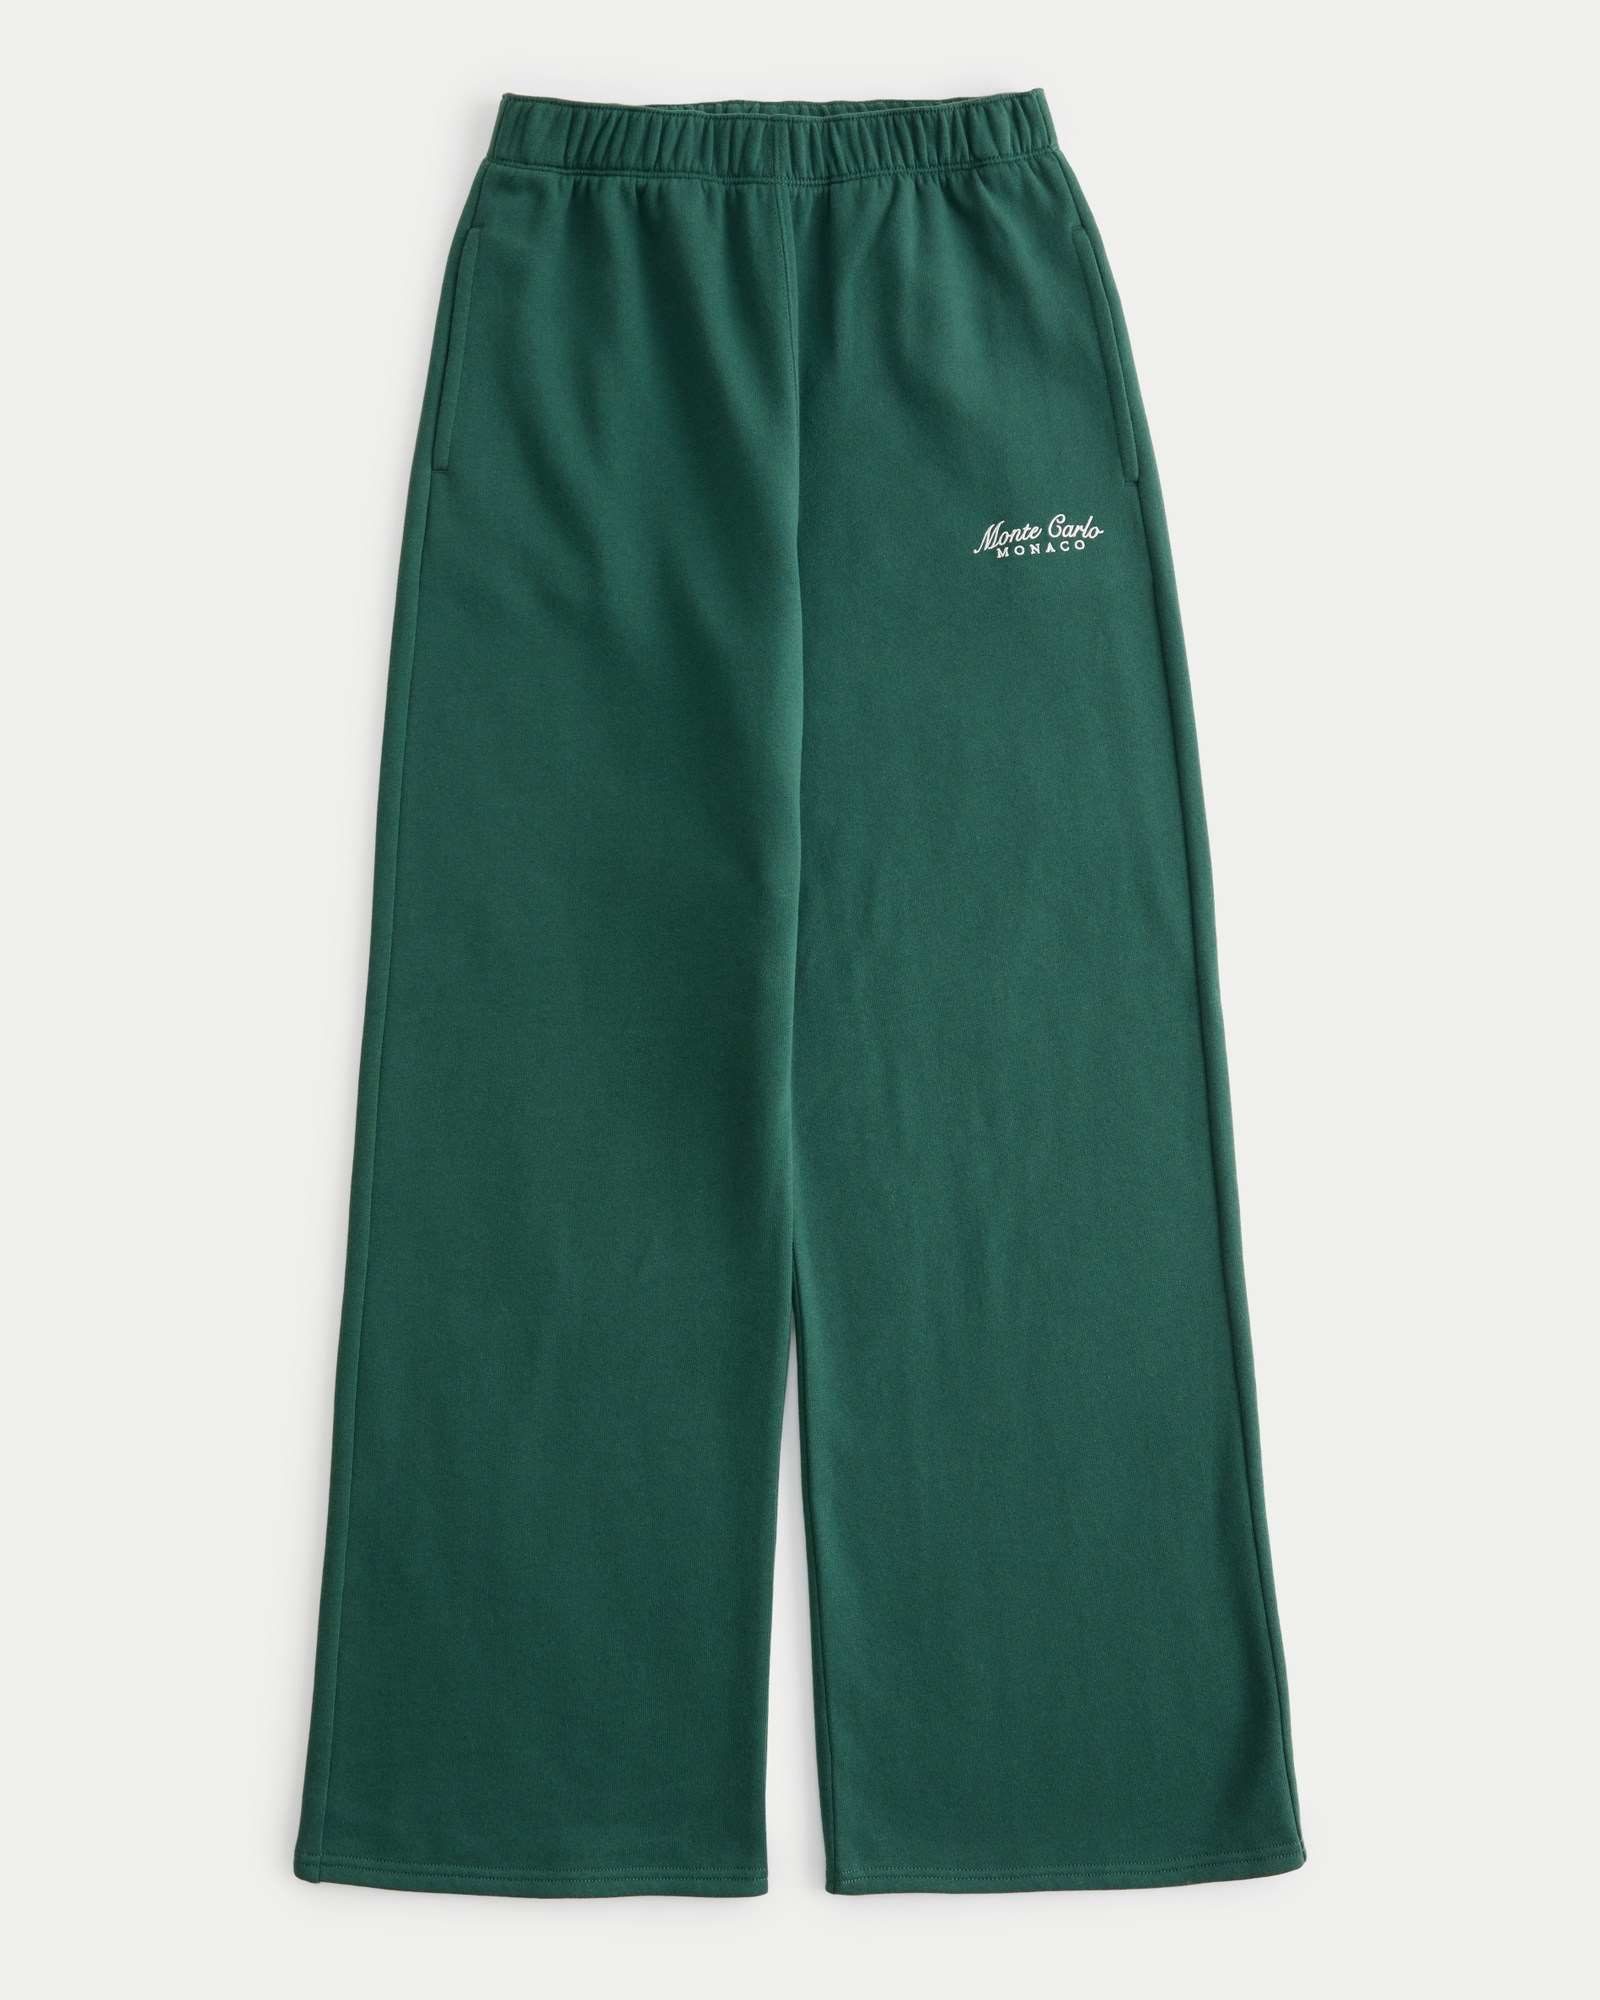 Hollister Sweatpants Size M - $11 (68% Off Retail) - From clare